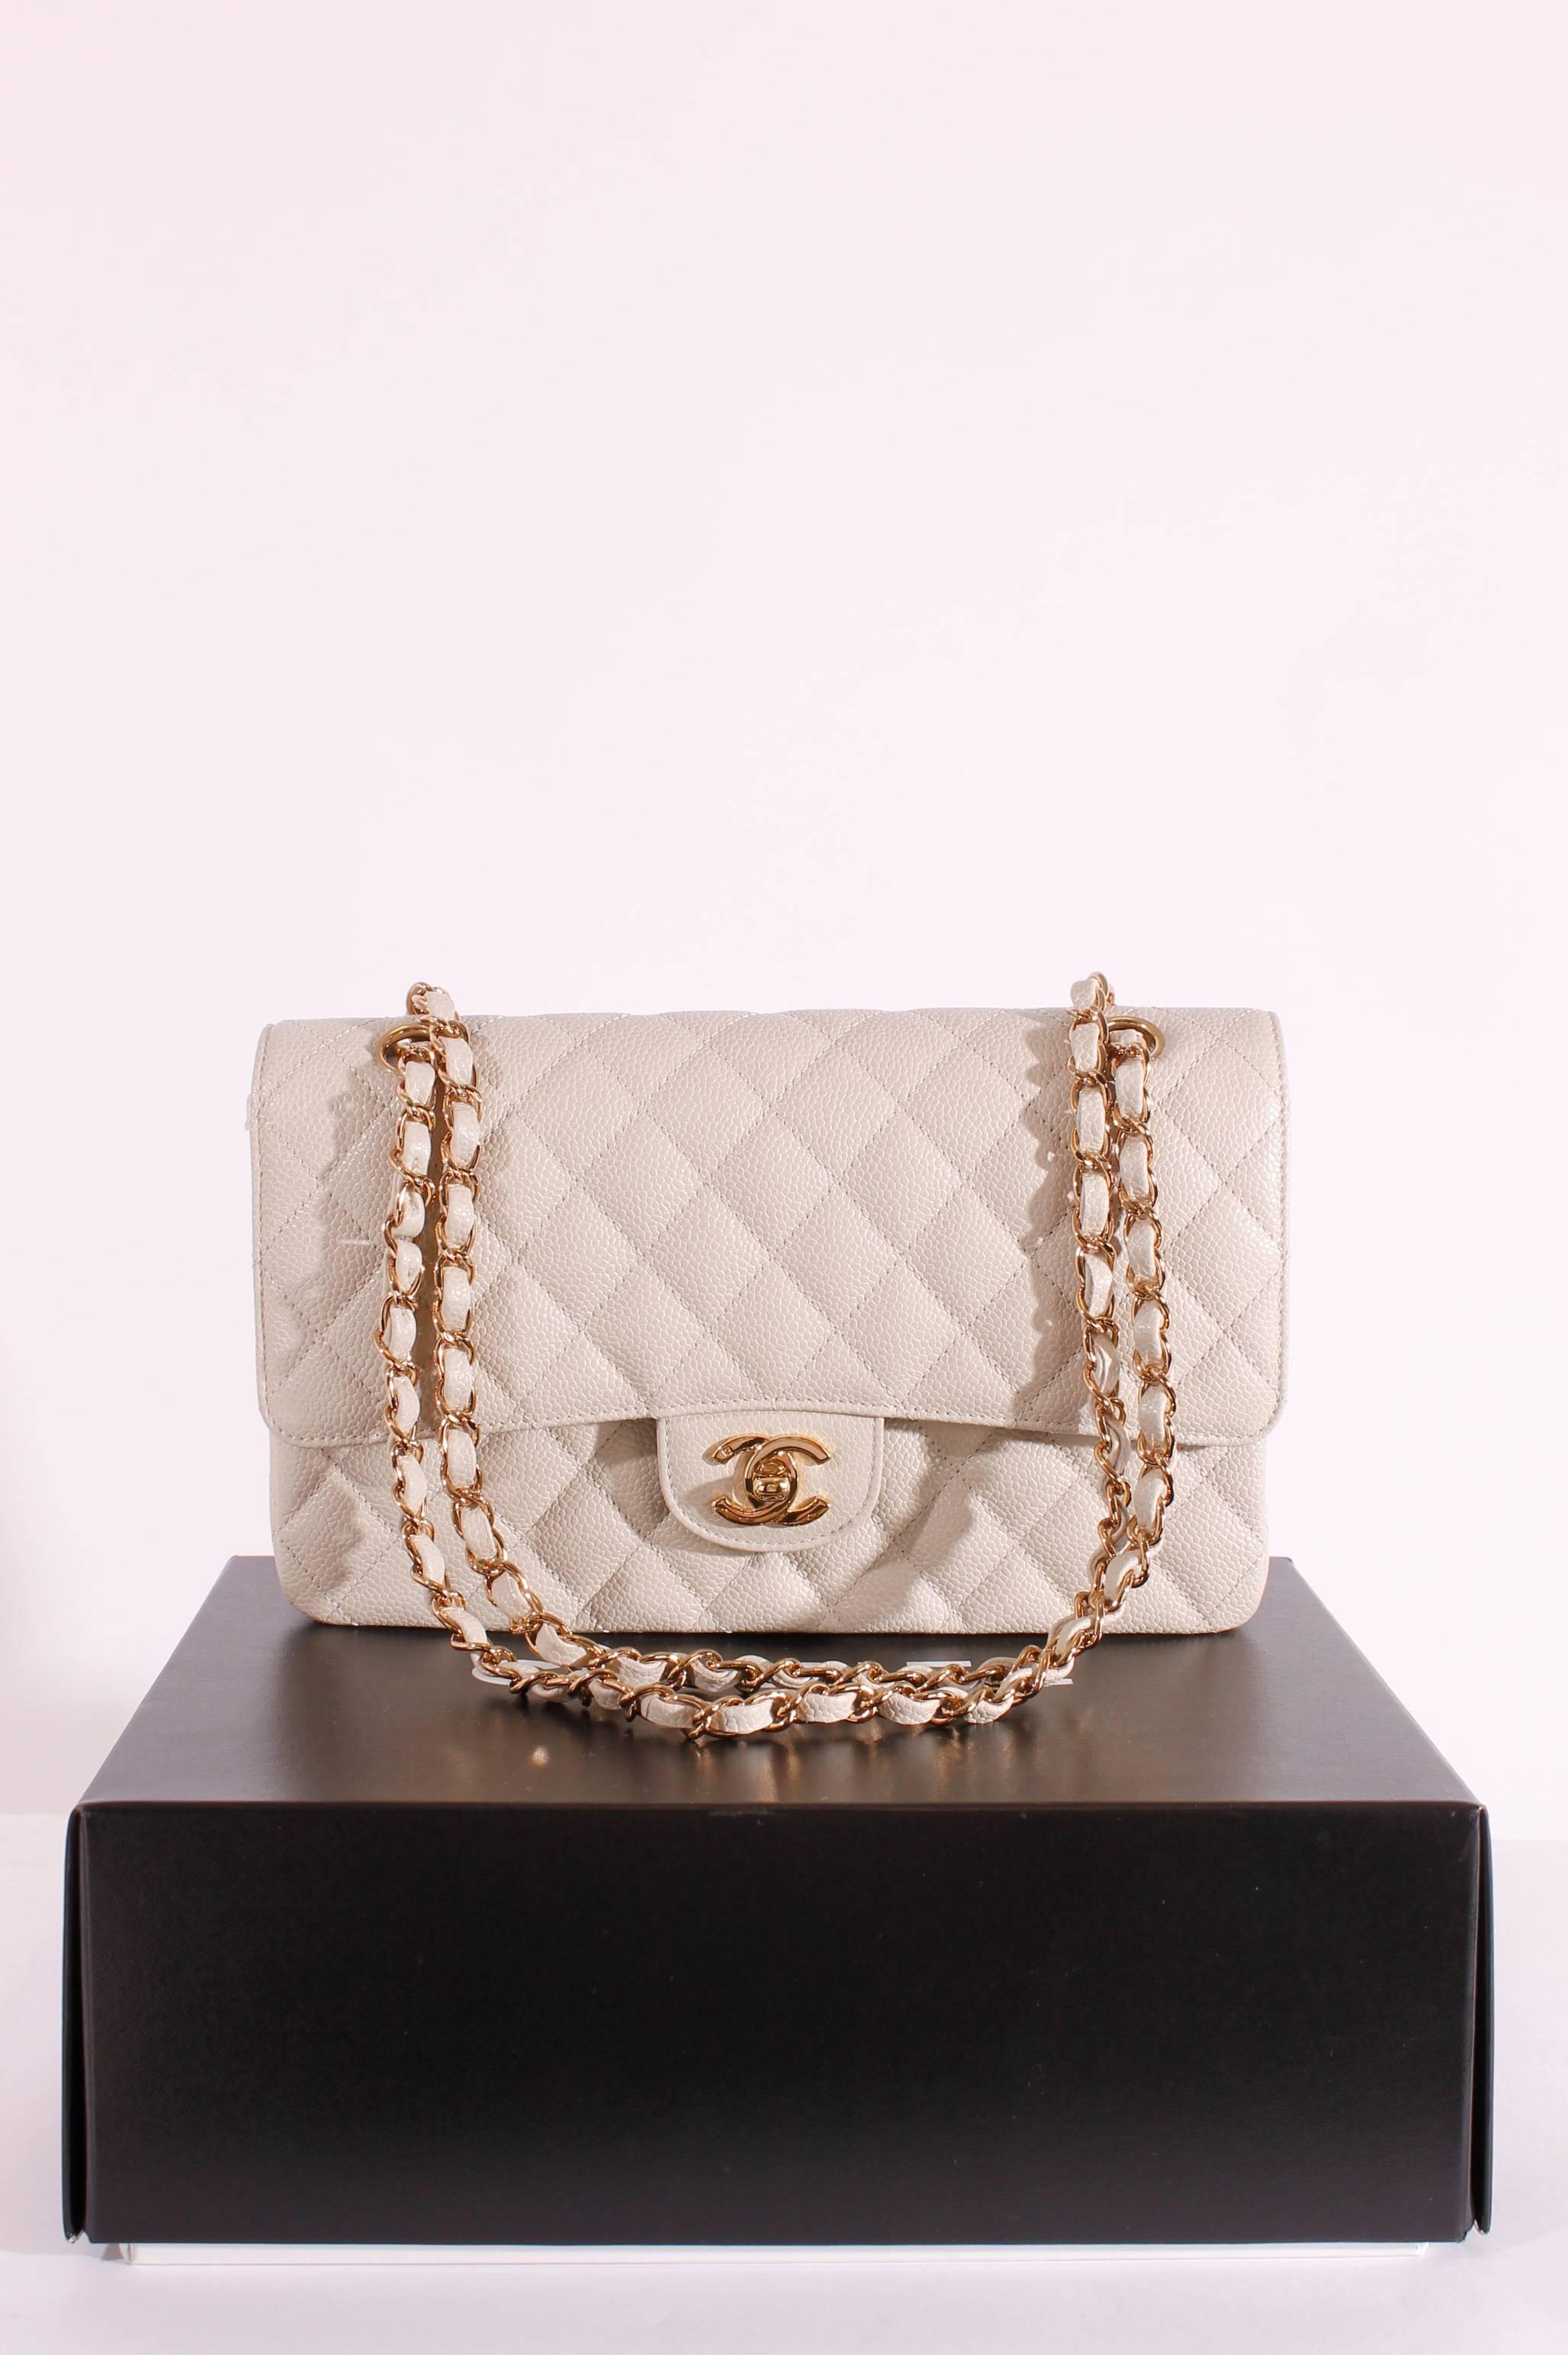 Classic bag by Chanel in very light gray caviar leather, this piece is like new! The colour of this bag is very hard to describe, it is also kind of beige or sand. However, this colour goes well with almost anything.

This 2.55 medium double flap